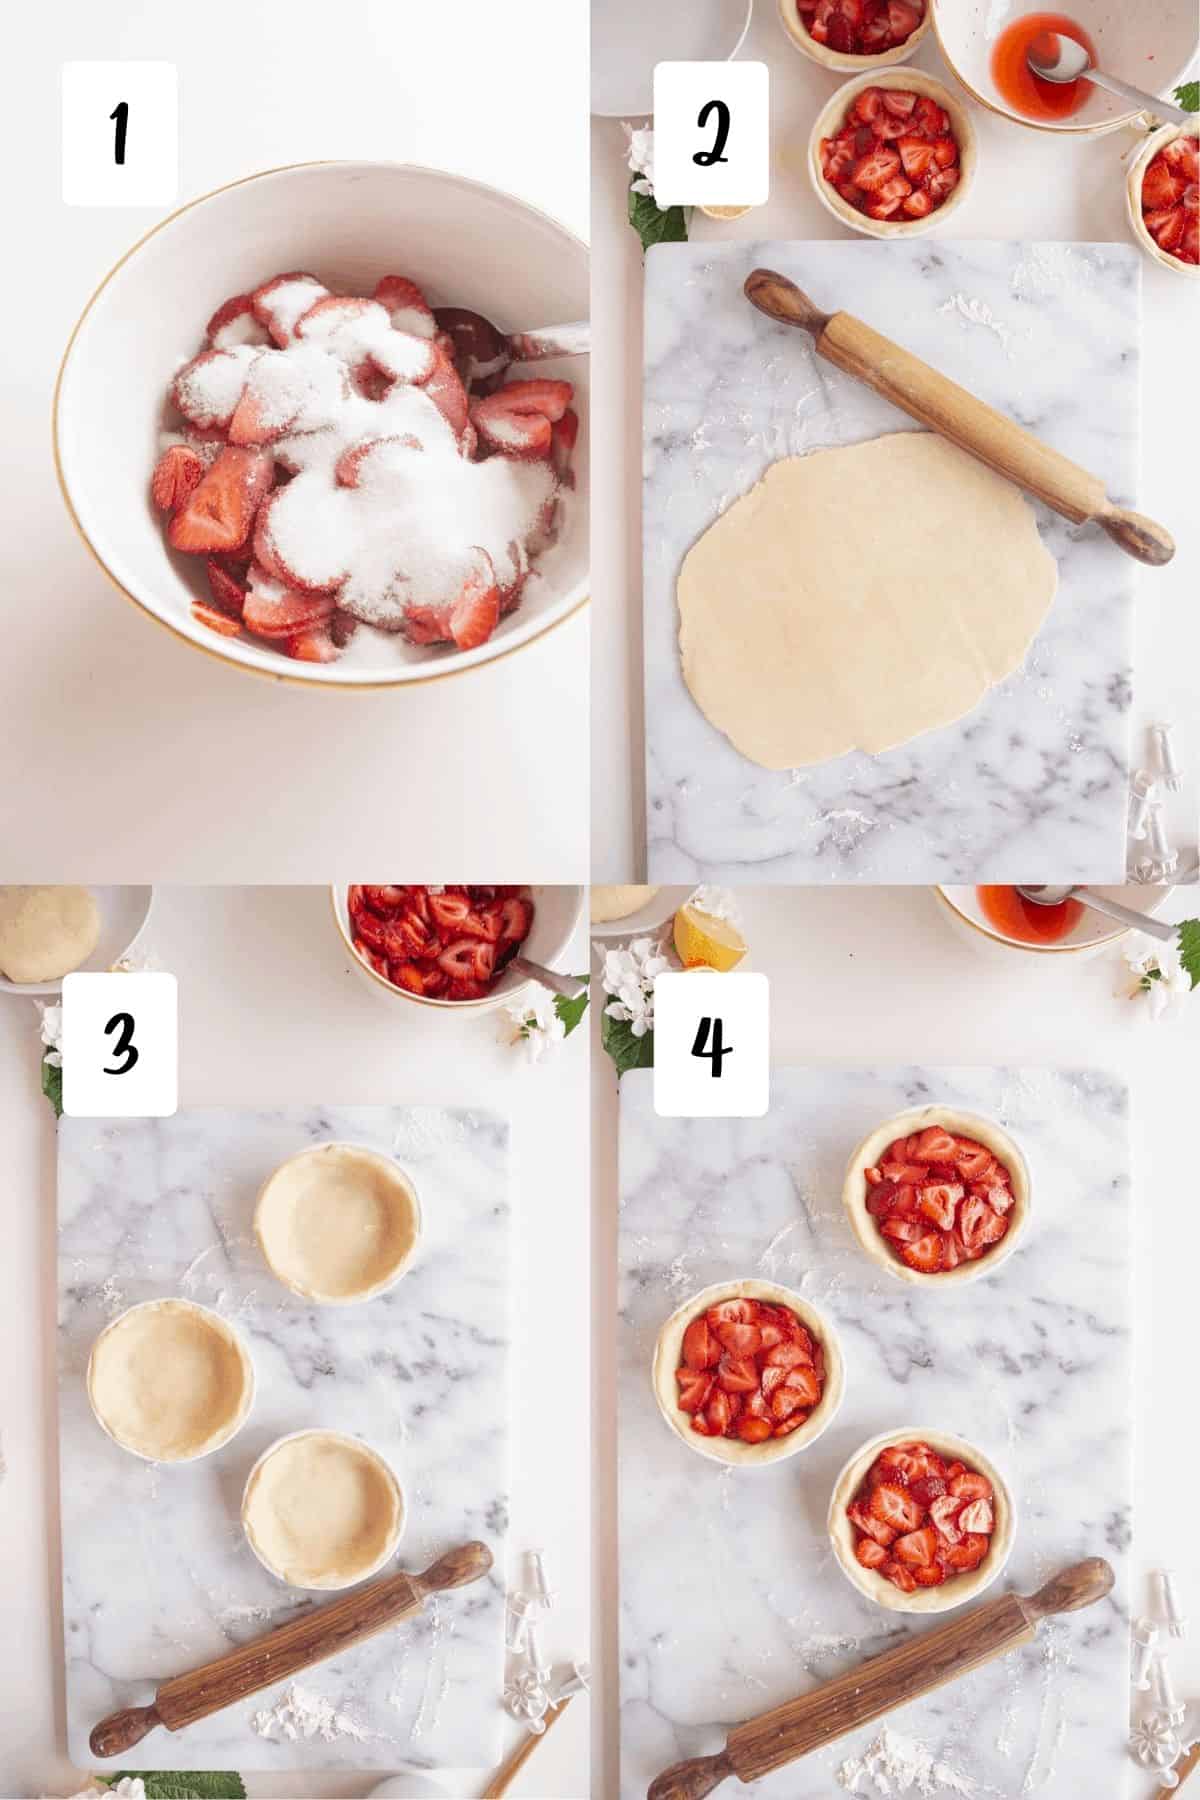 process of making strawberry pies - strawberries and sugar, rolling out pie dough, pie dough in pans, strawberries in pie pans